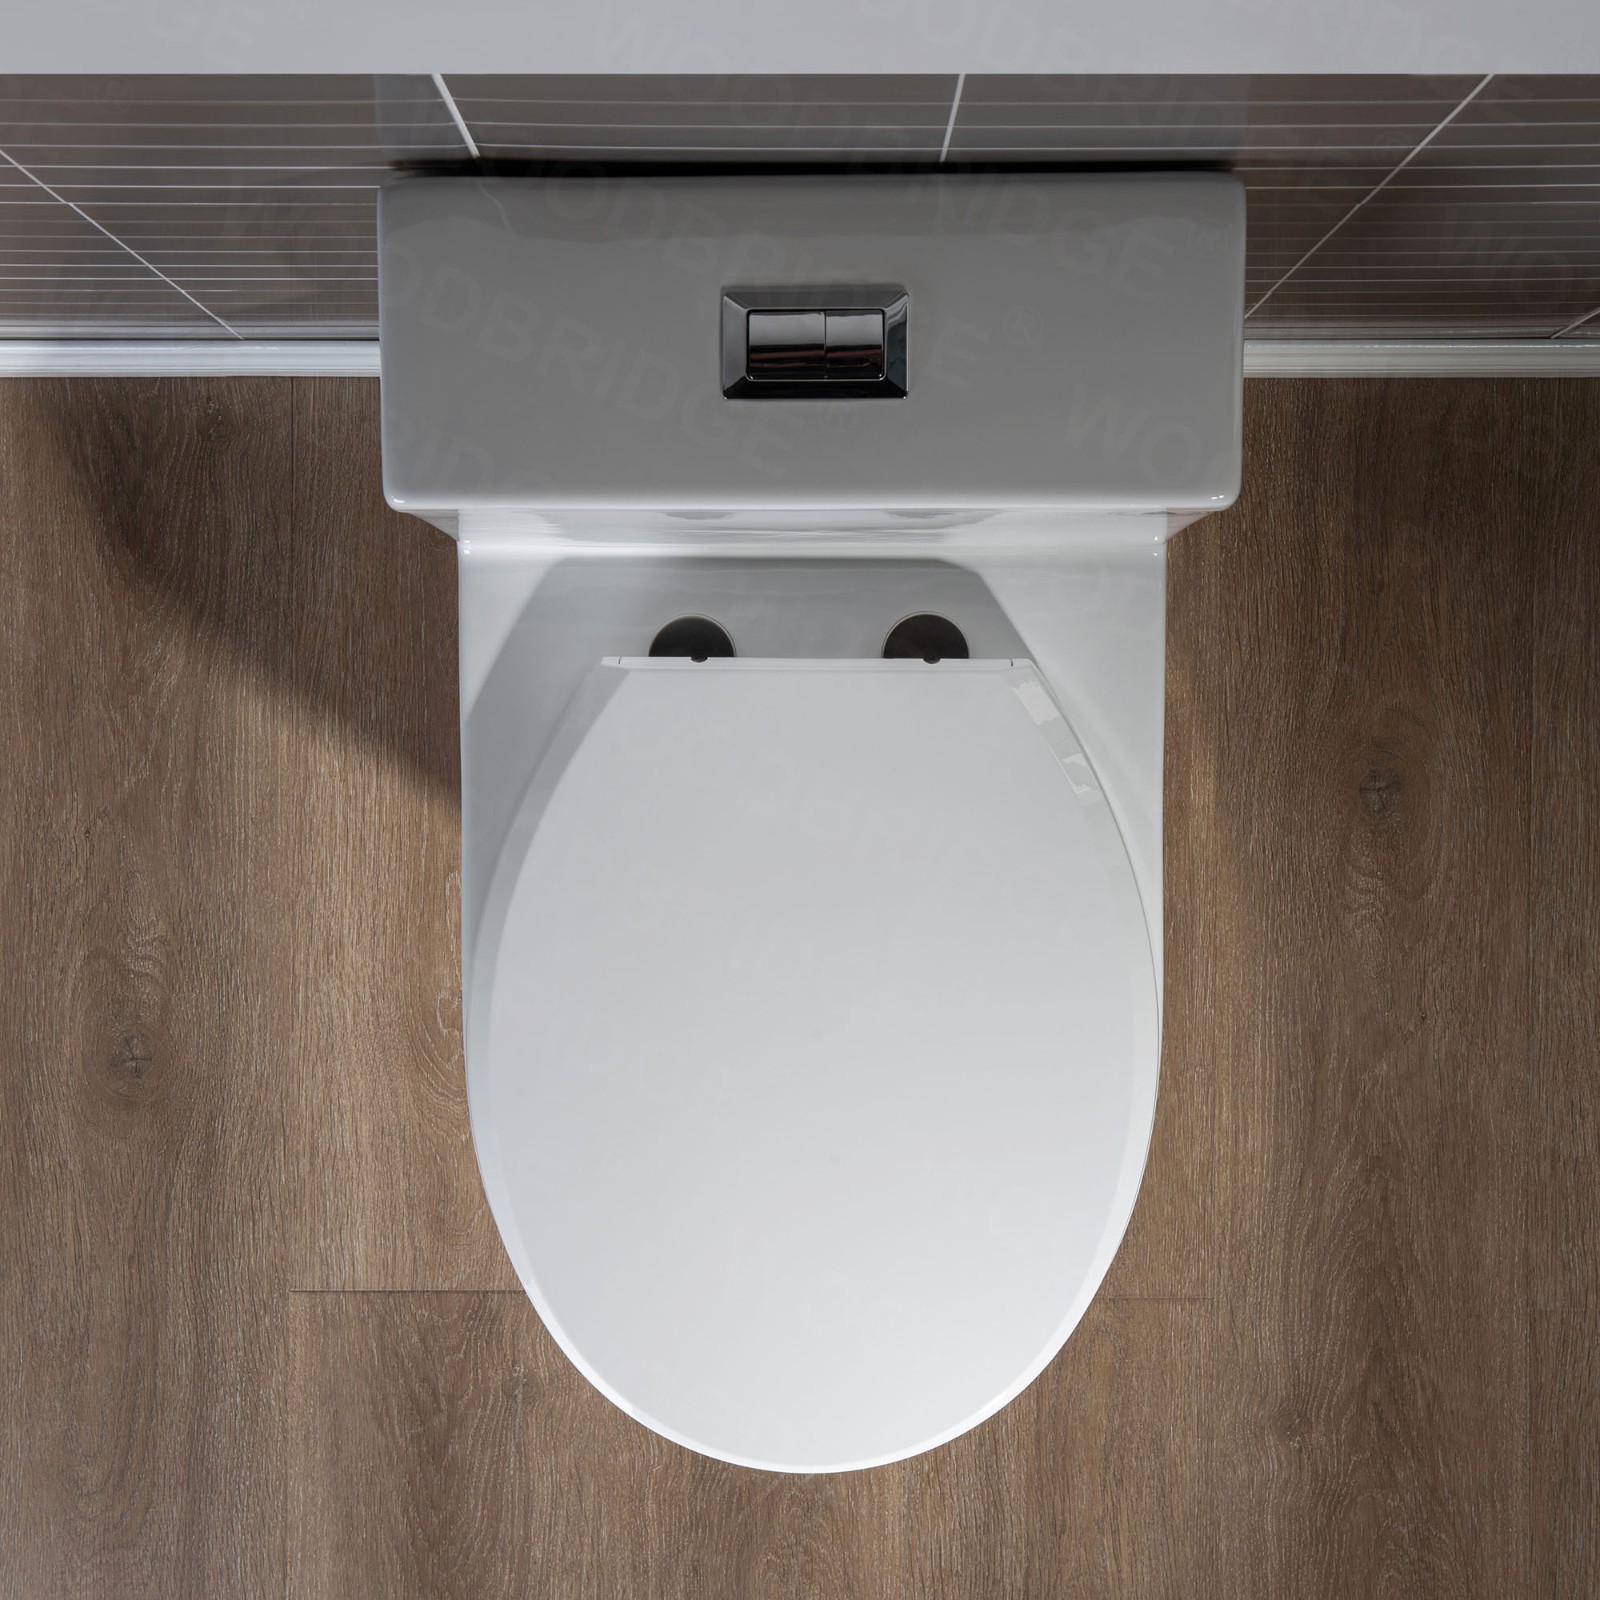  WOODBRIDGE B-0500-A Modern One-Piece Elongated toilet with Solf Closed Seat and Hand Free Touchless Sensor Flush Kit, White_5483